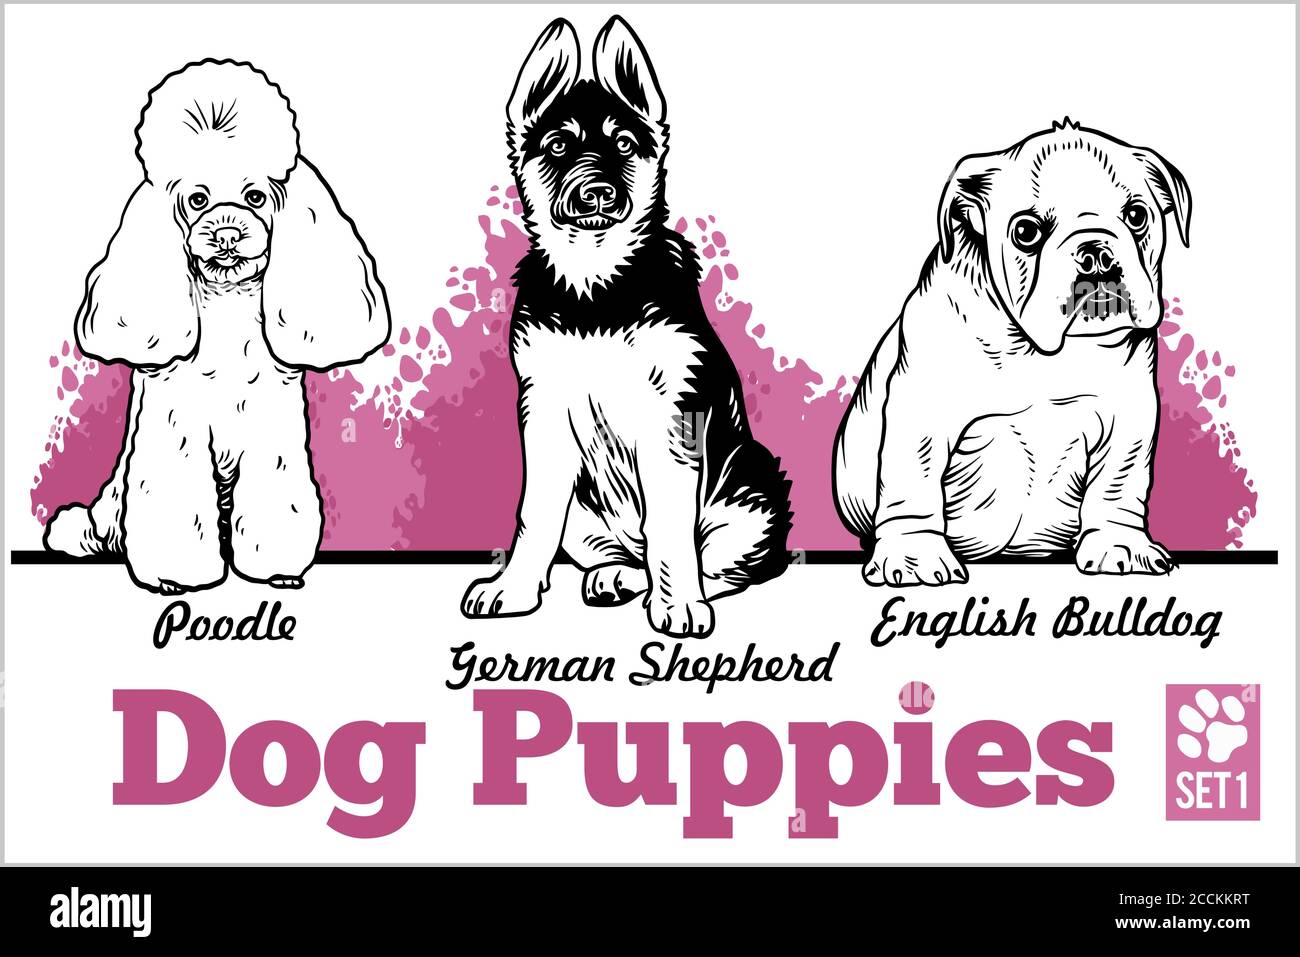 English Bulldog, Poodle and German Shepherd - Dog Puppies. Vector set. Funny dogs puppy pet characters different breads doggy illustration isolated on Stock Vector